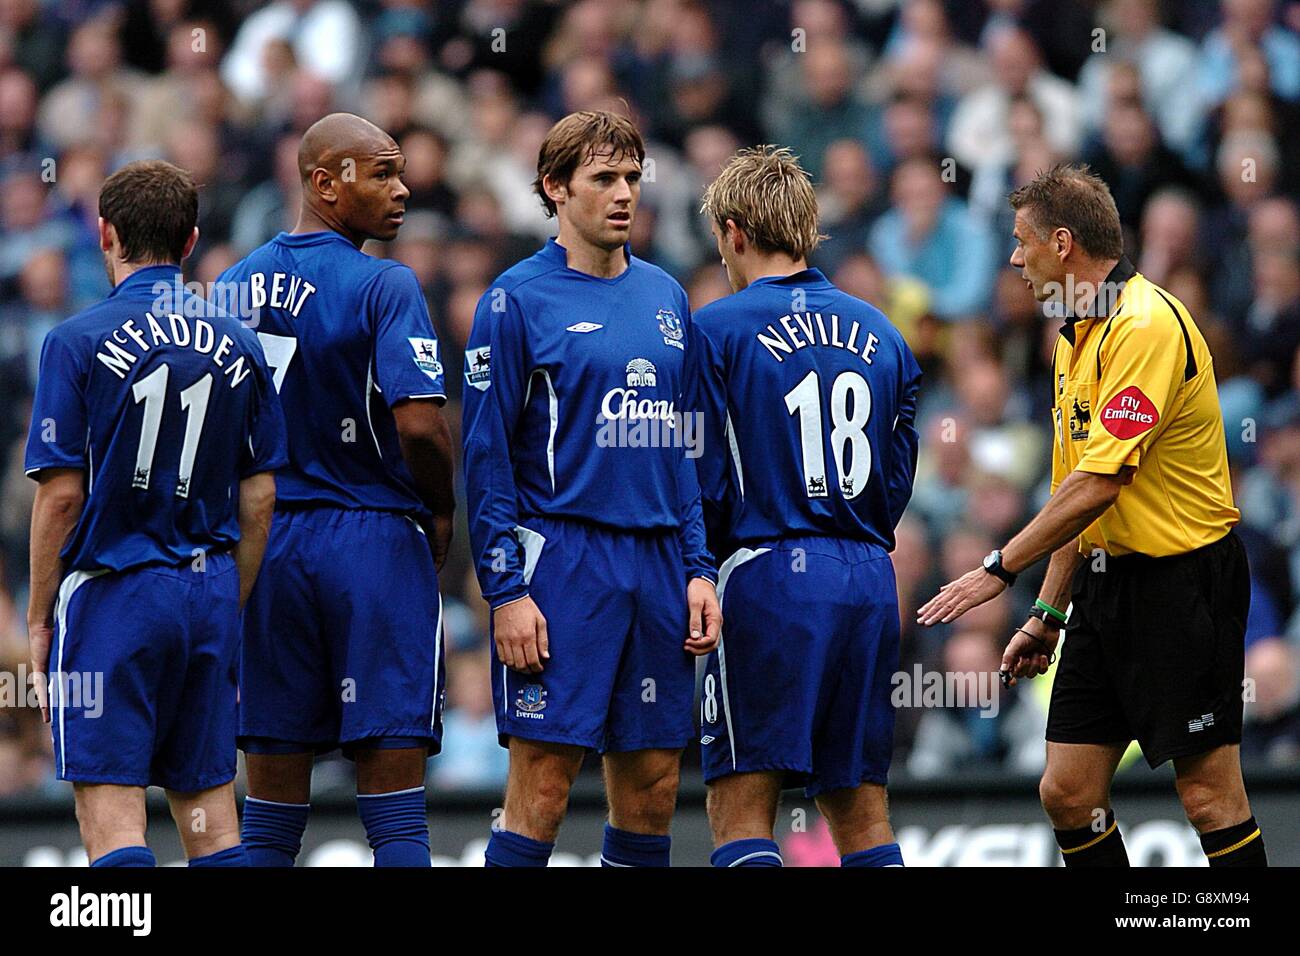 Everton's James McFadden, Marcus Bent, Kevin Kilbane and Phil Neville form a defensive wall under the watchfull eye of referee Mark Halsey Stock Photo